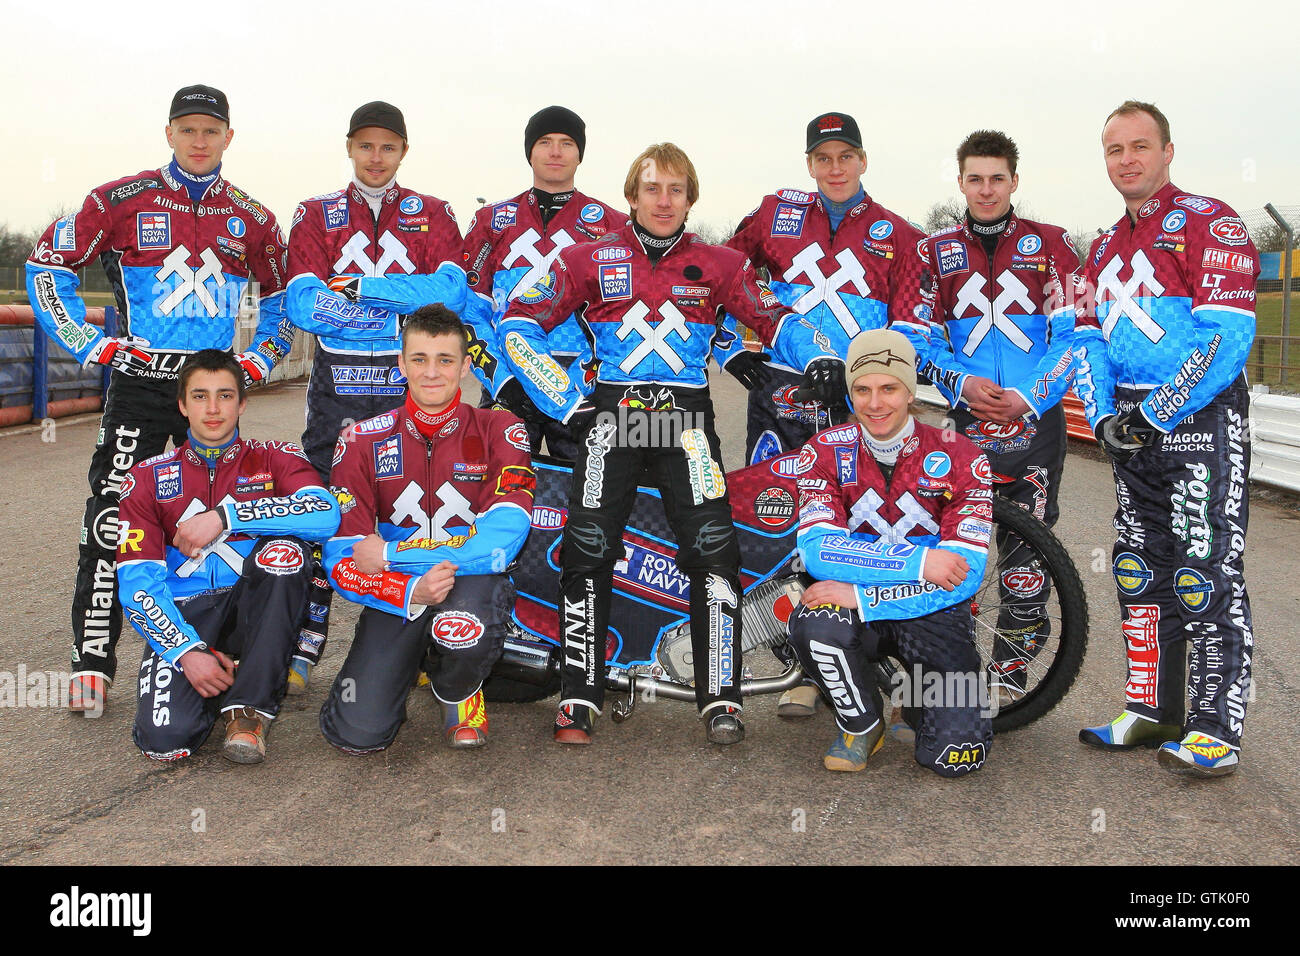 Lakeside Hammers riders pose for a team photograph - Lakeside ...